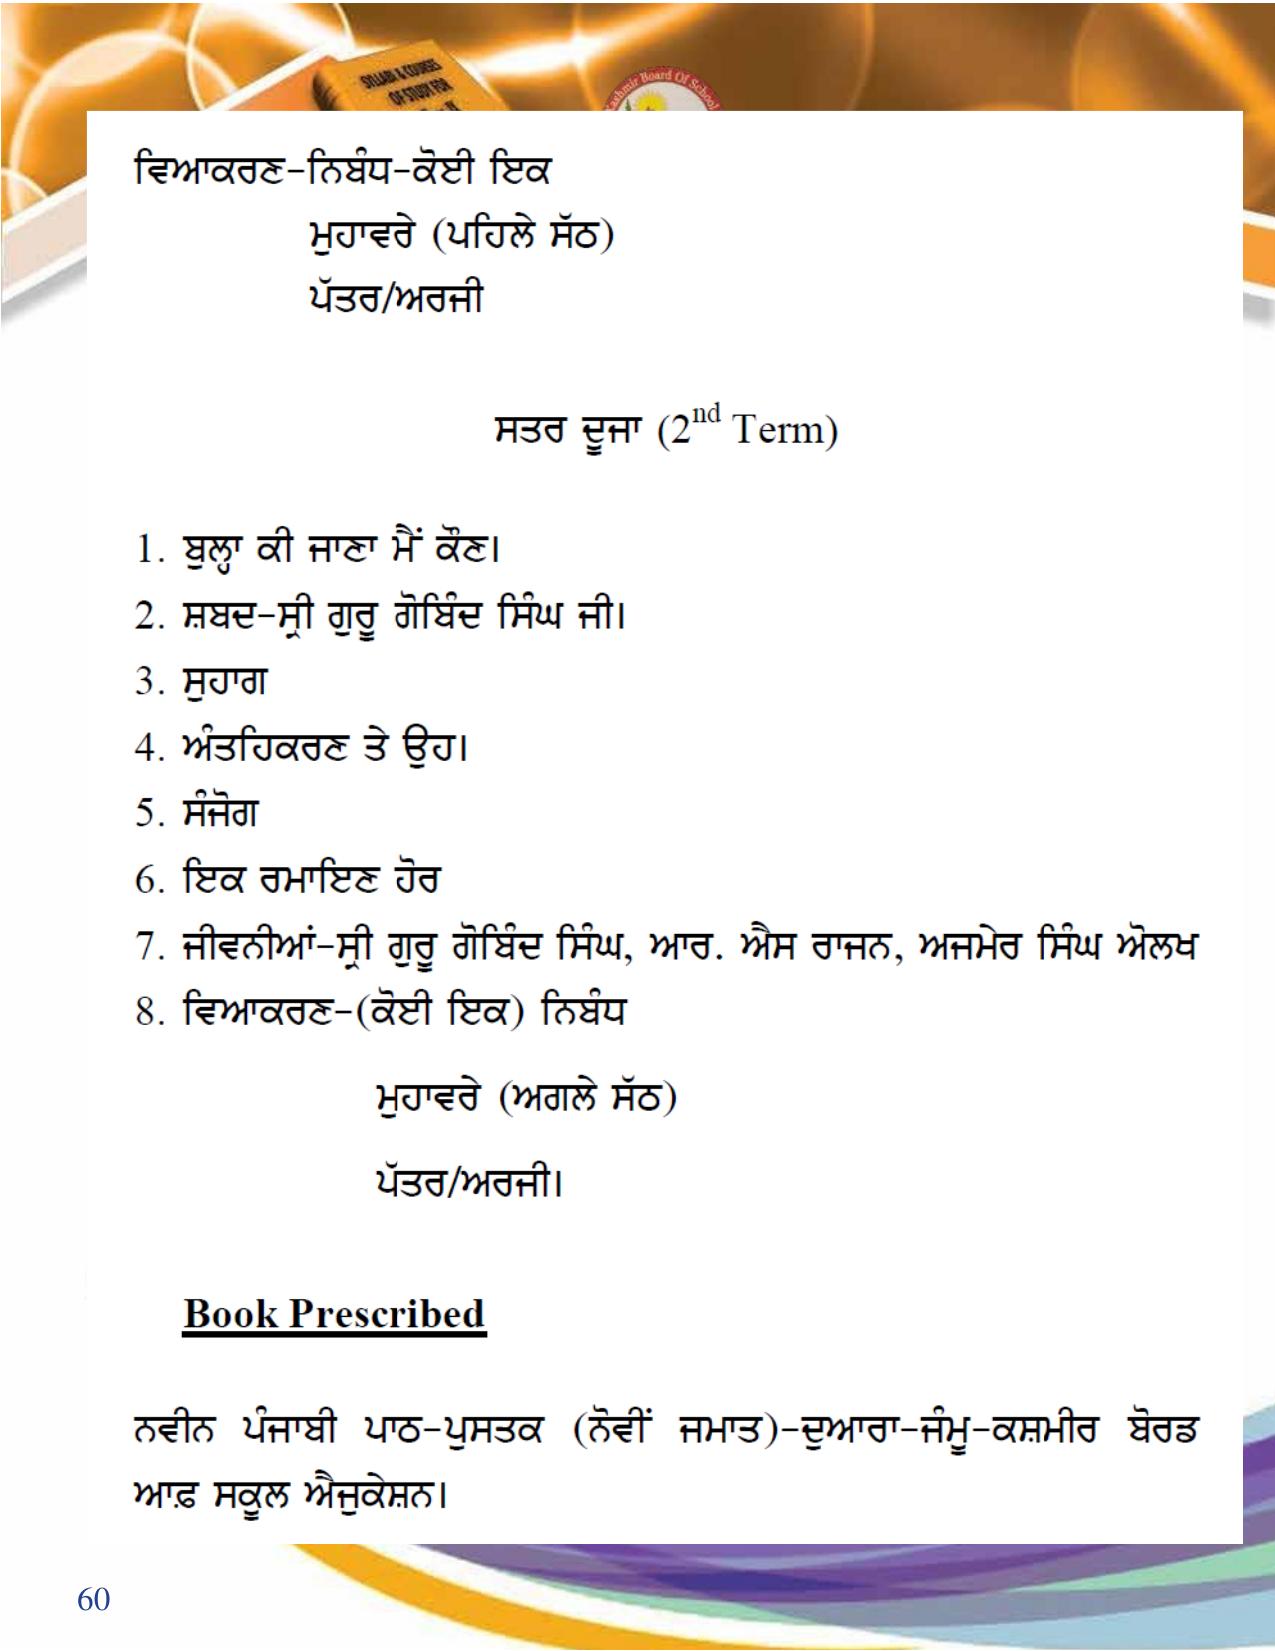 JKBOSE Syllabus for 9th class - Page 61